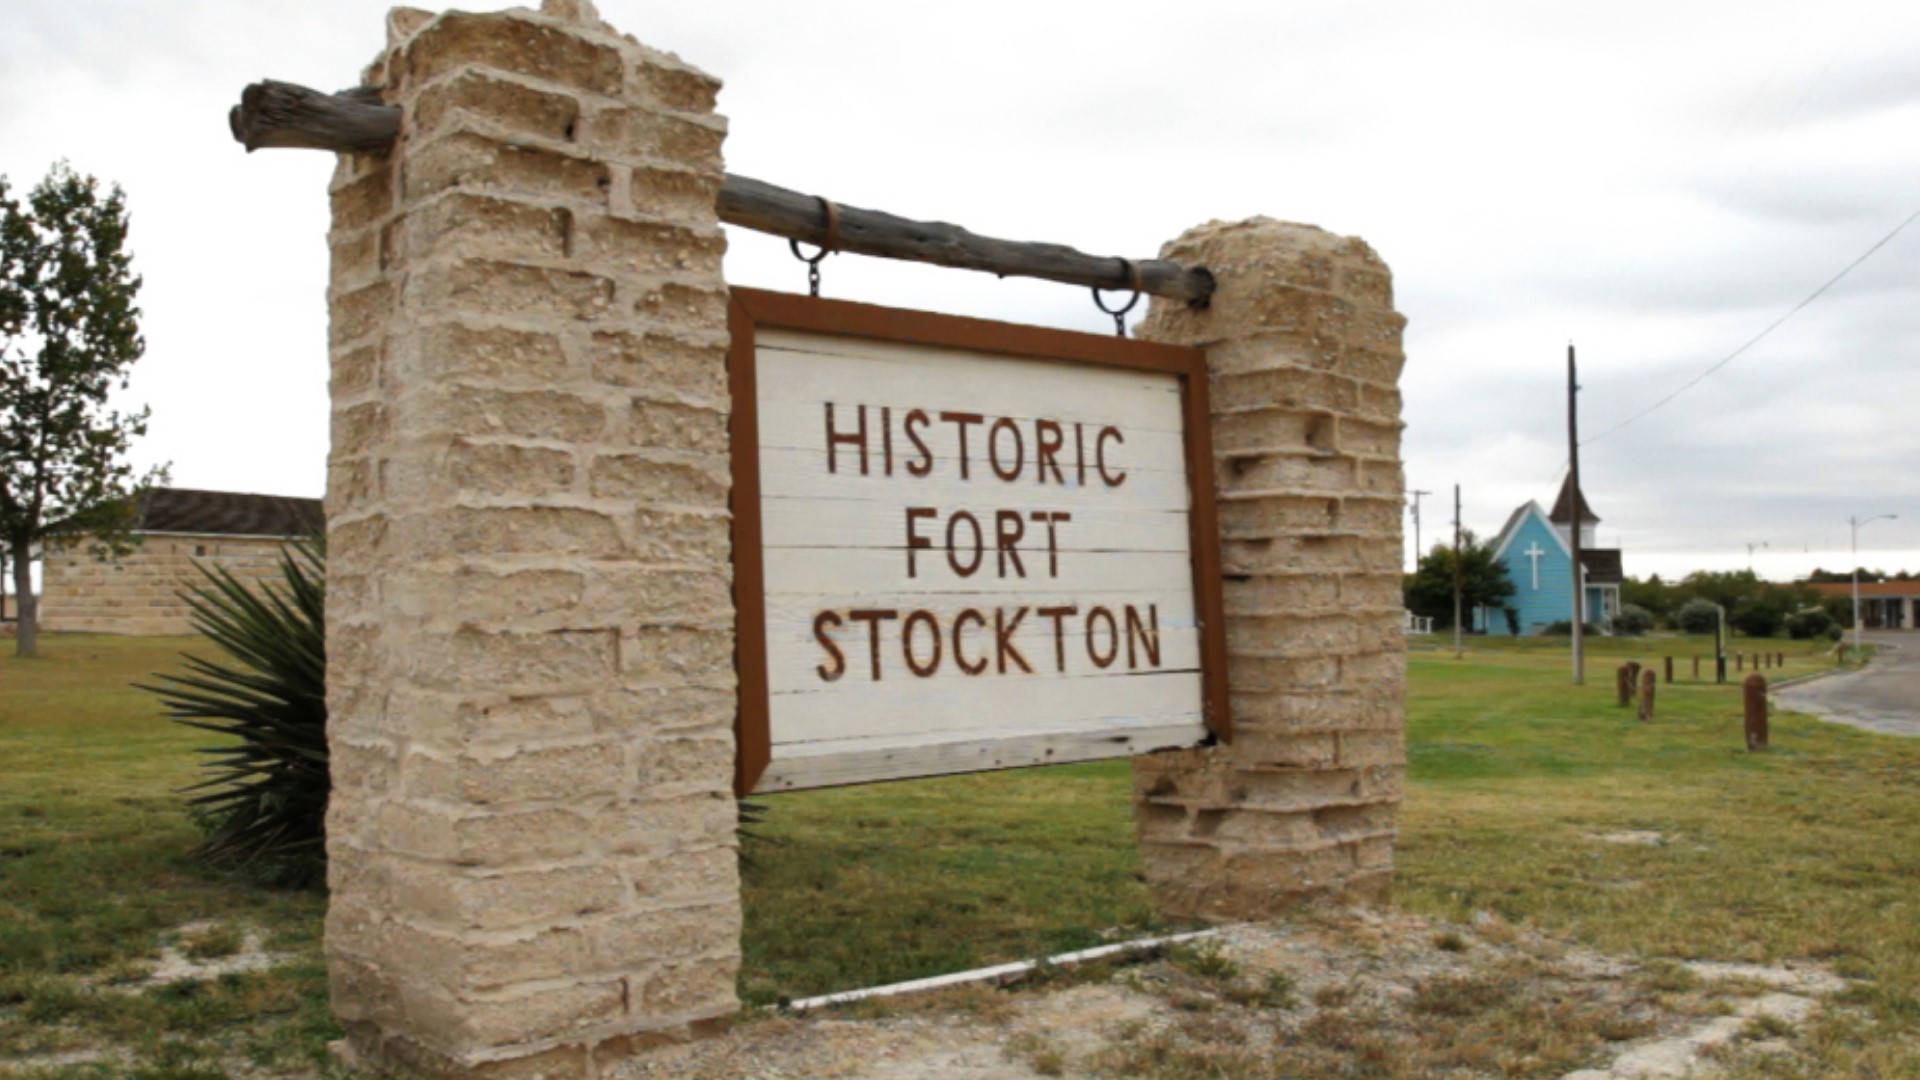 During the weekend Fort Stockton will be transformed back into the frontier of Texas in the 1870s.